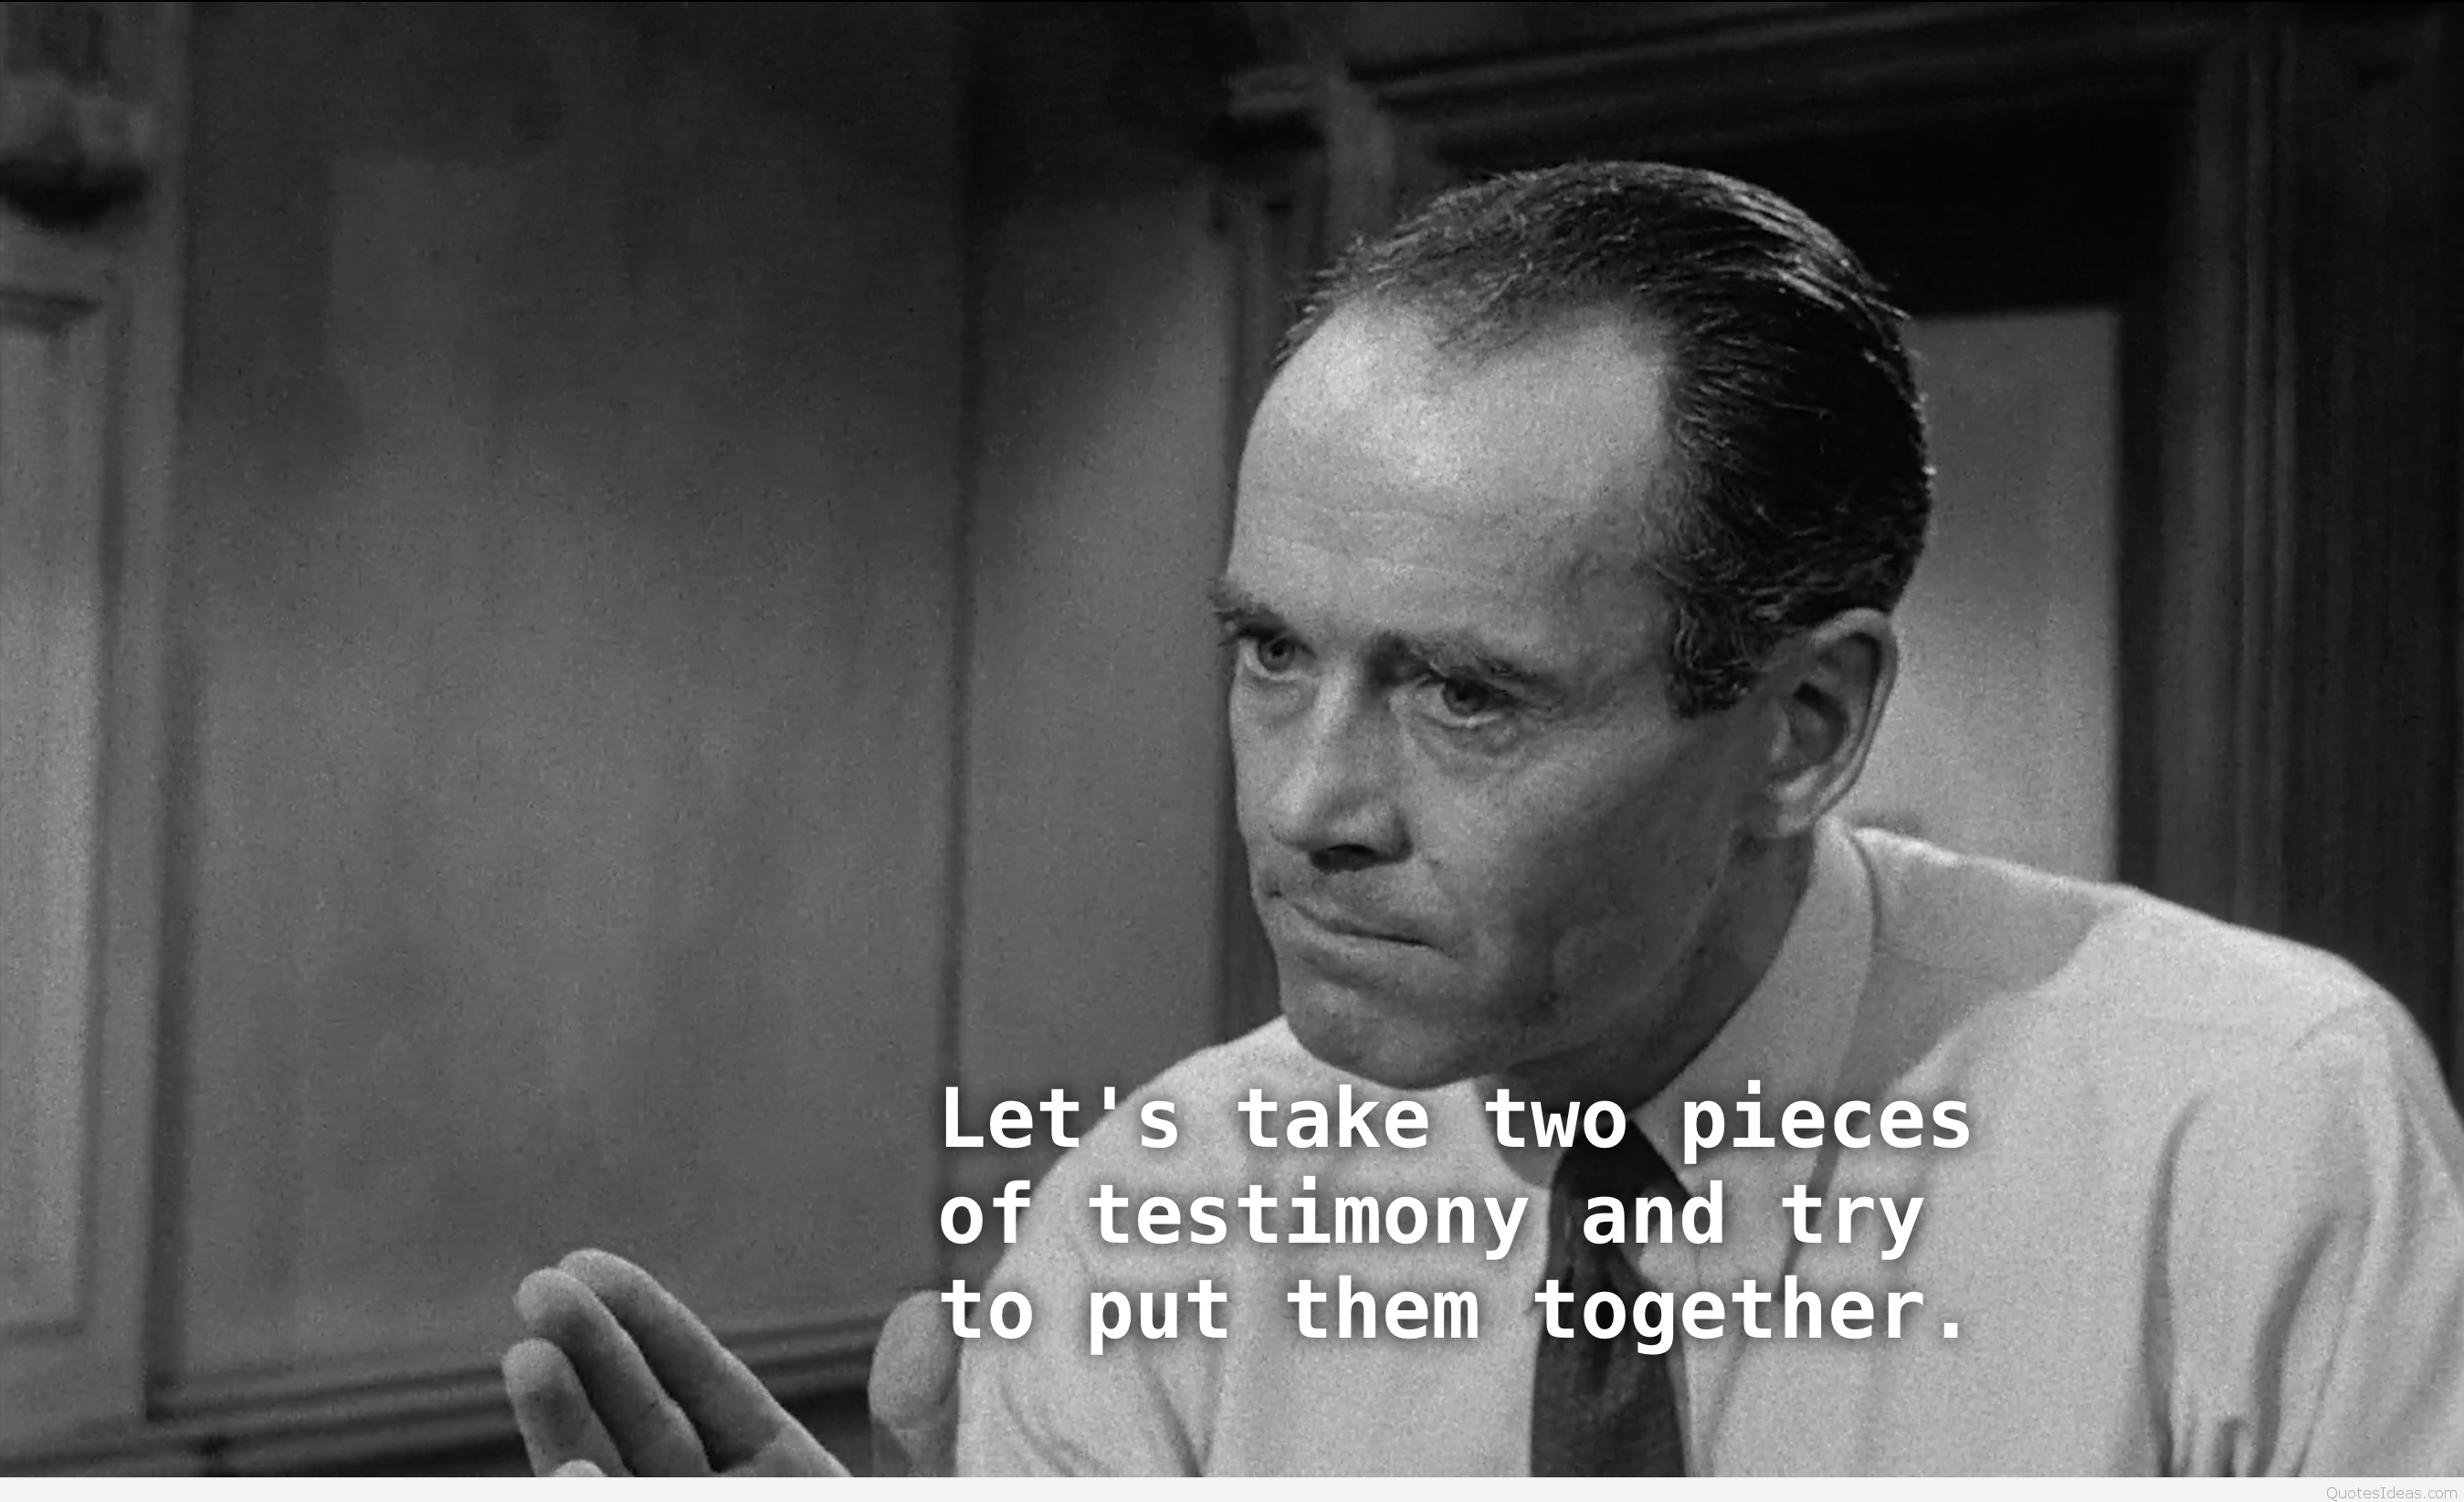 Theme Stated - 12 Angry Men Quotes - HD Wallpaper 